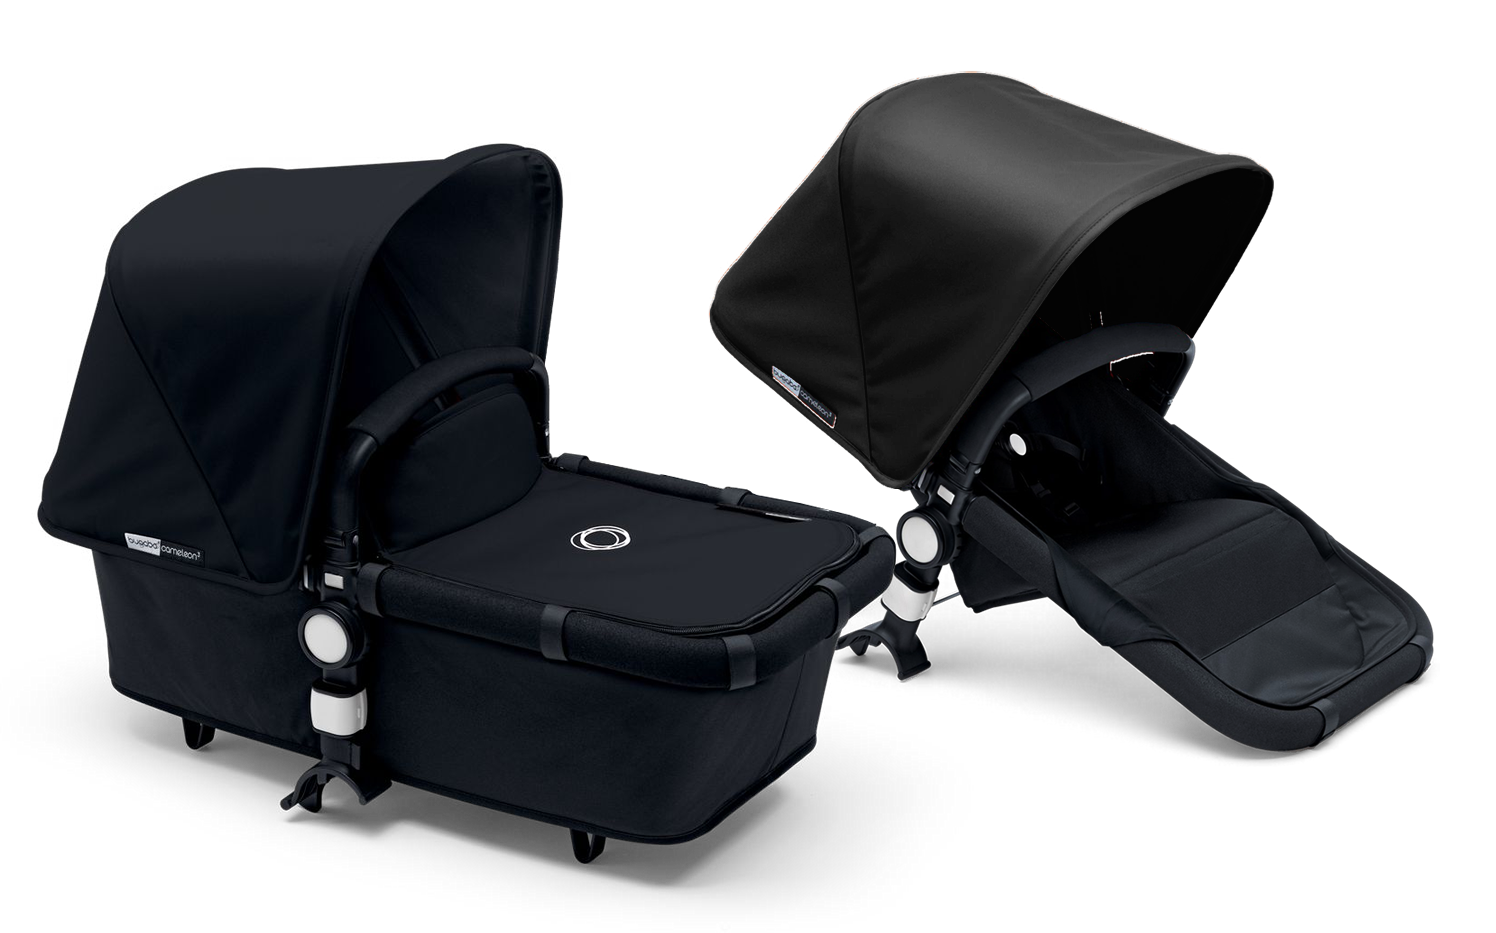 bugaboo cameleon bassinet to seat